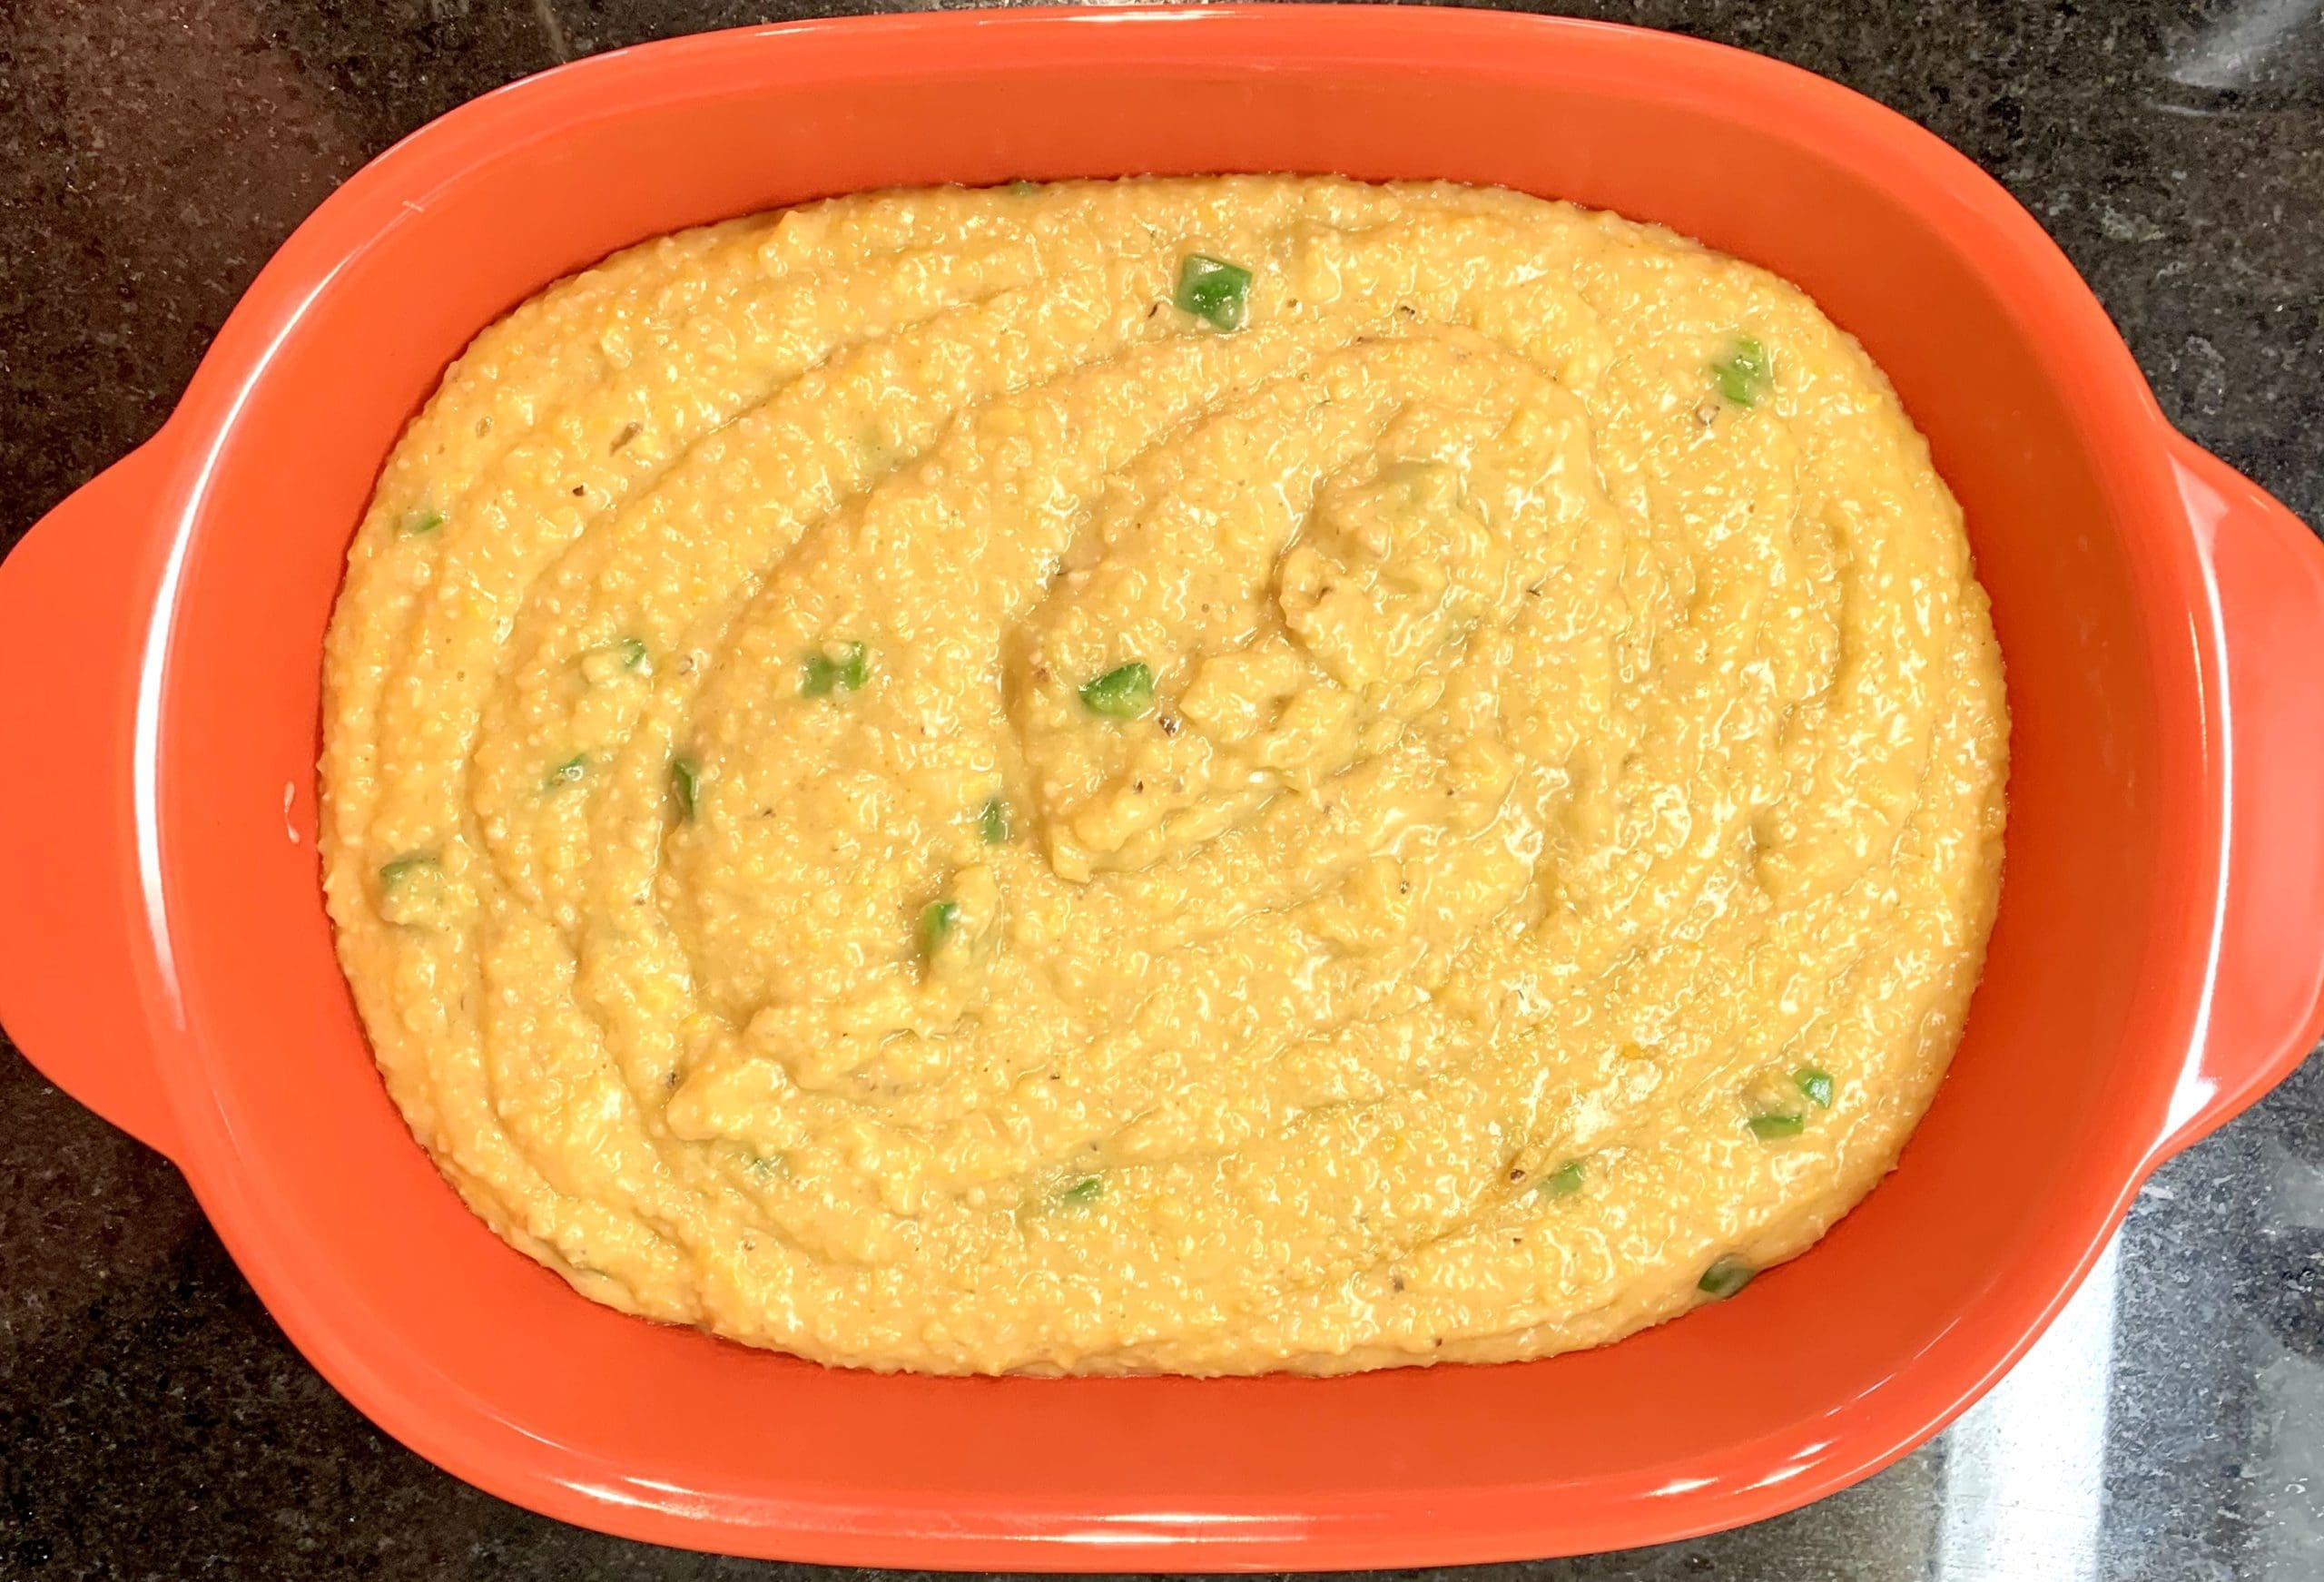 jalapeno cheddar cheese grits